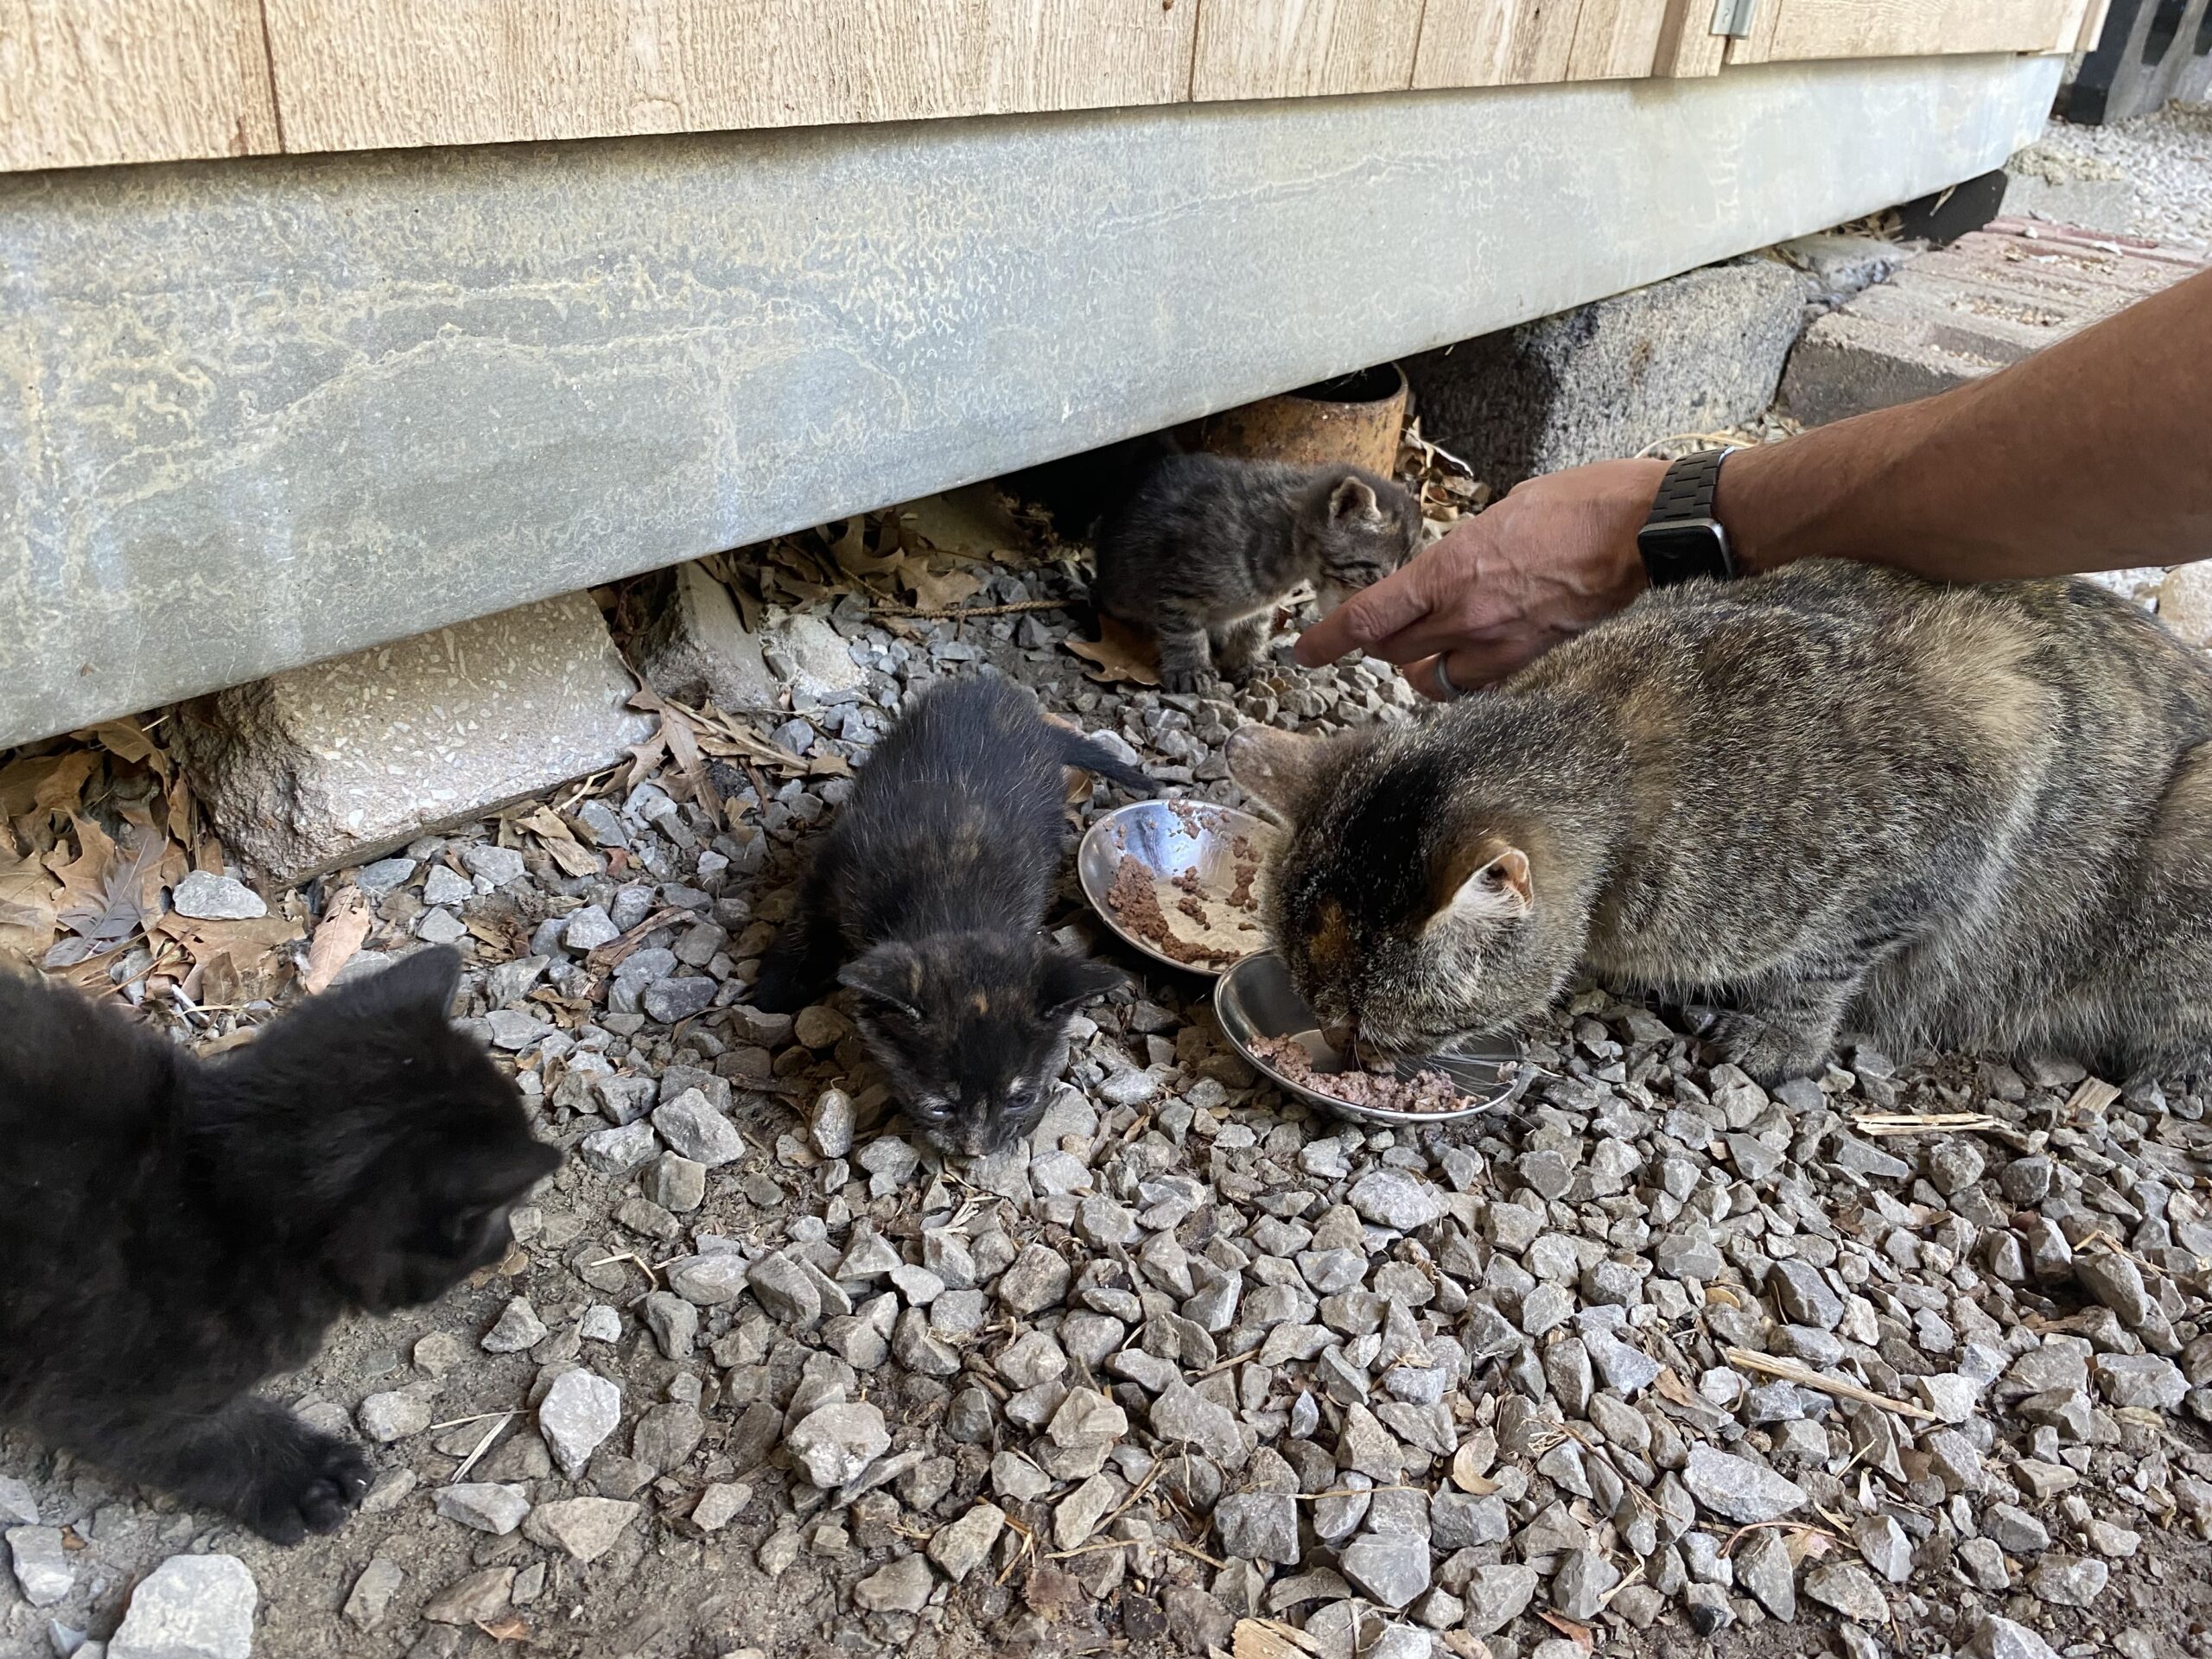 The first sighting of kittens